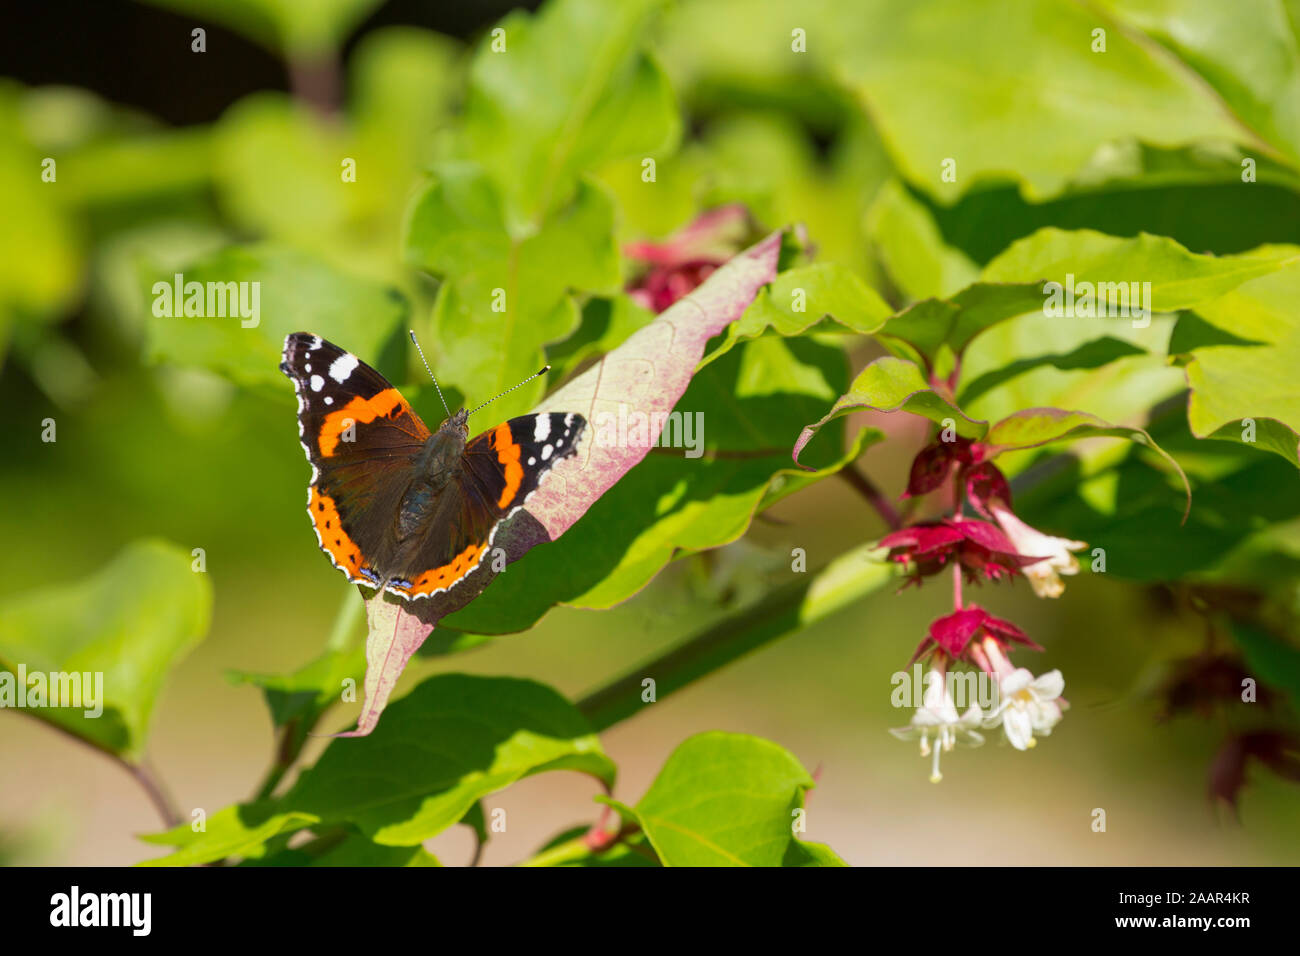 A Red Admiral butterfly, Vanessa atalanta resting on Himalayan Honeysuckle, Leycesteria formosa, in a garden in Lancashire England UK GB Stock Photo